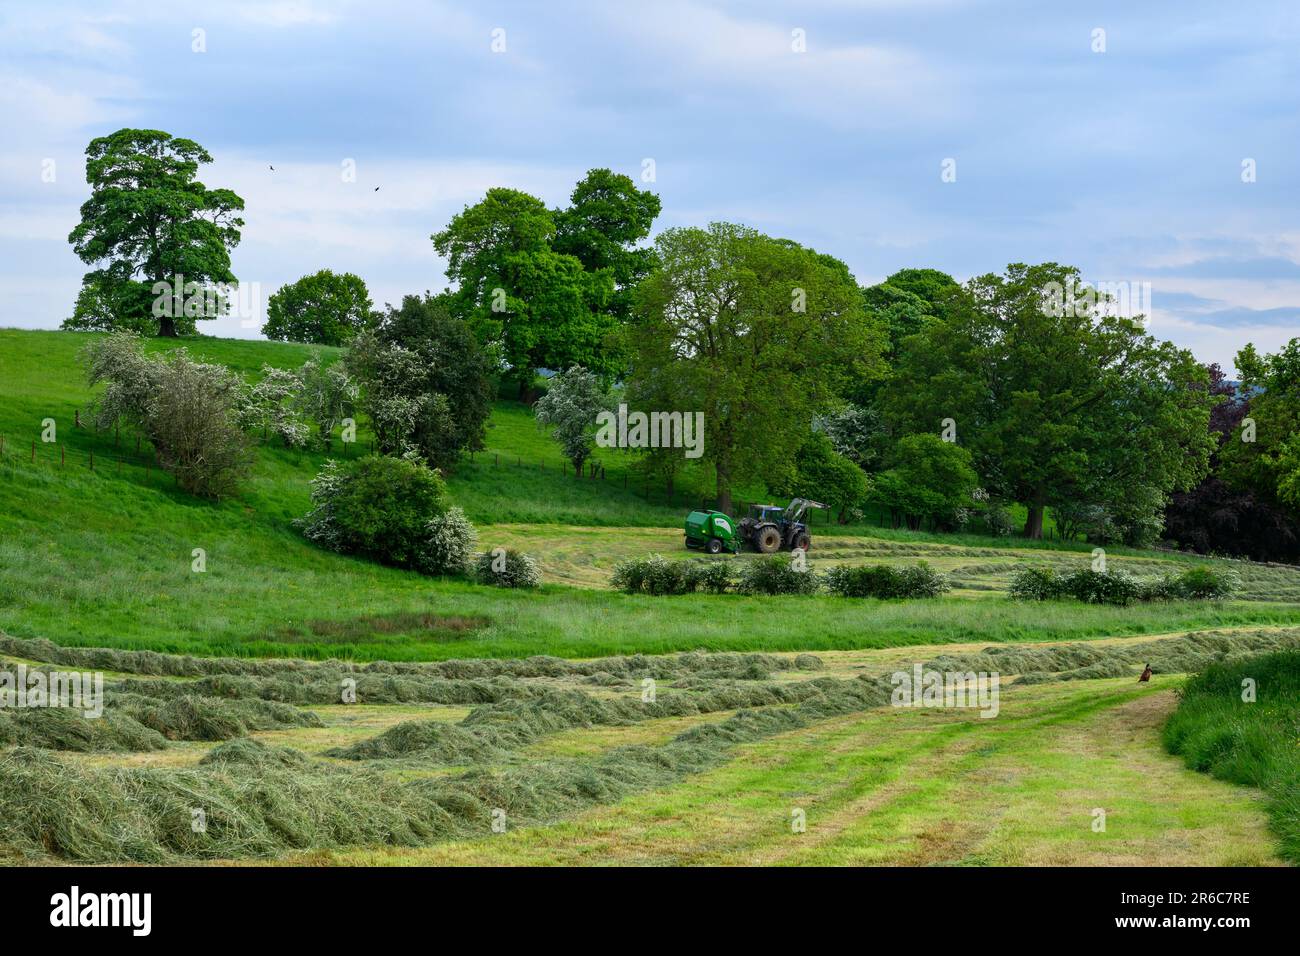 Haymaking (Valmet tractor being driven in field pulling McHale F5400 baler, collecting dry grass for fodder) - Leathley, North Yorkshire, England, UK. Stock Photo